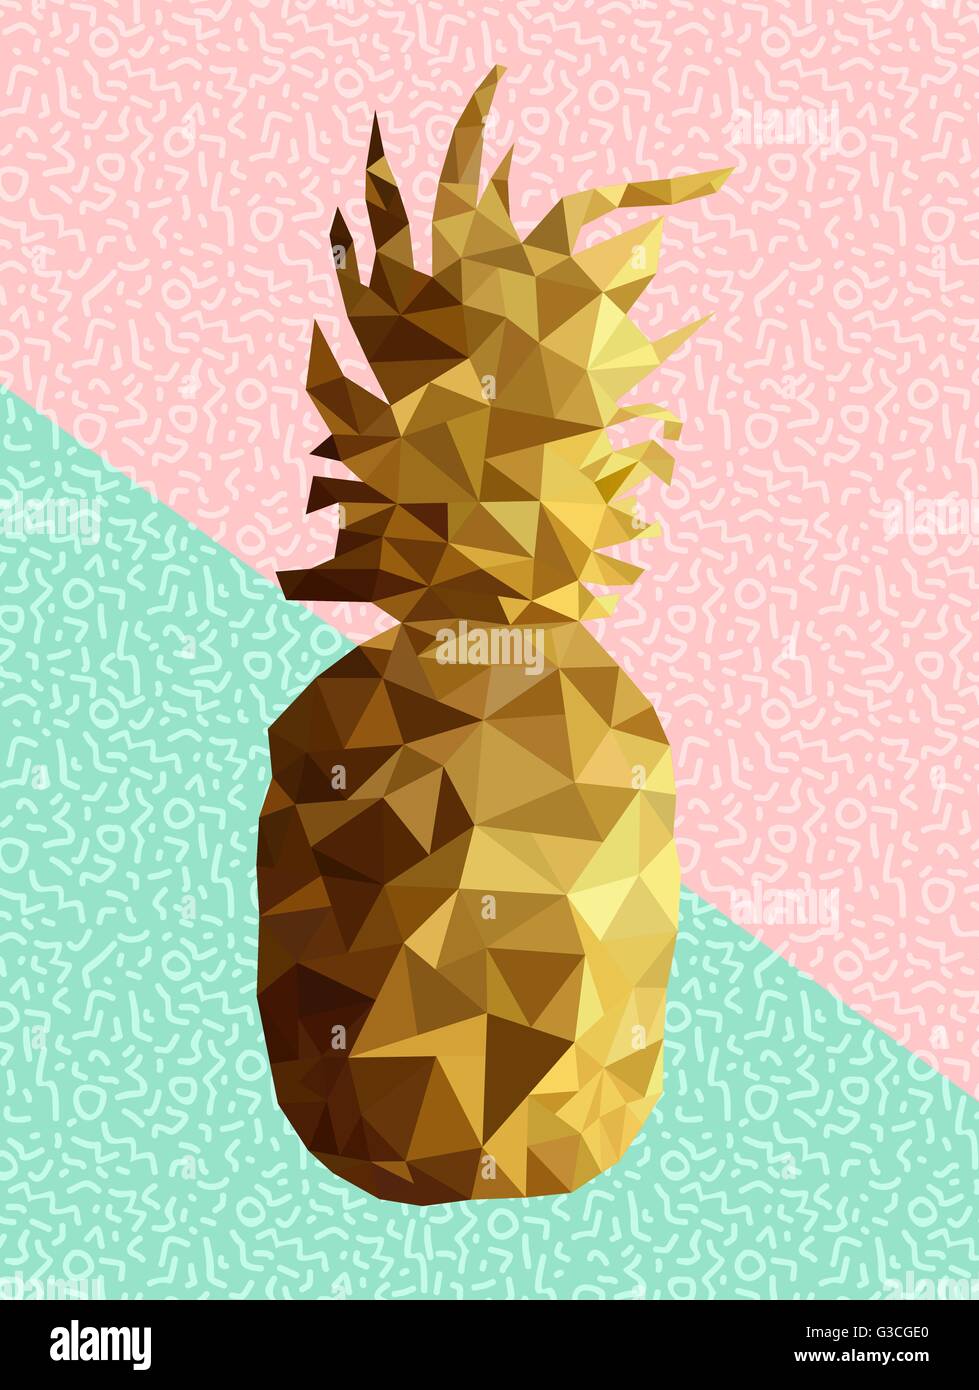 Retro summer concept illustration of pineapple fruit gold low poly design with memphis style shapes background in soft pink blue Stock Vector